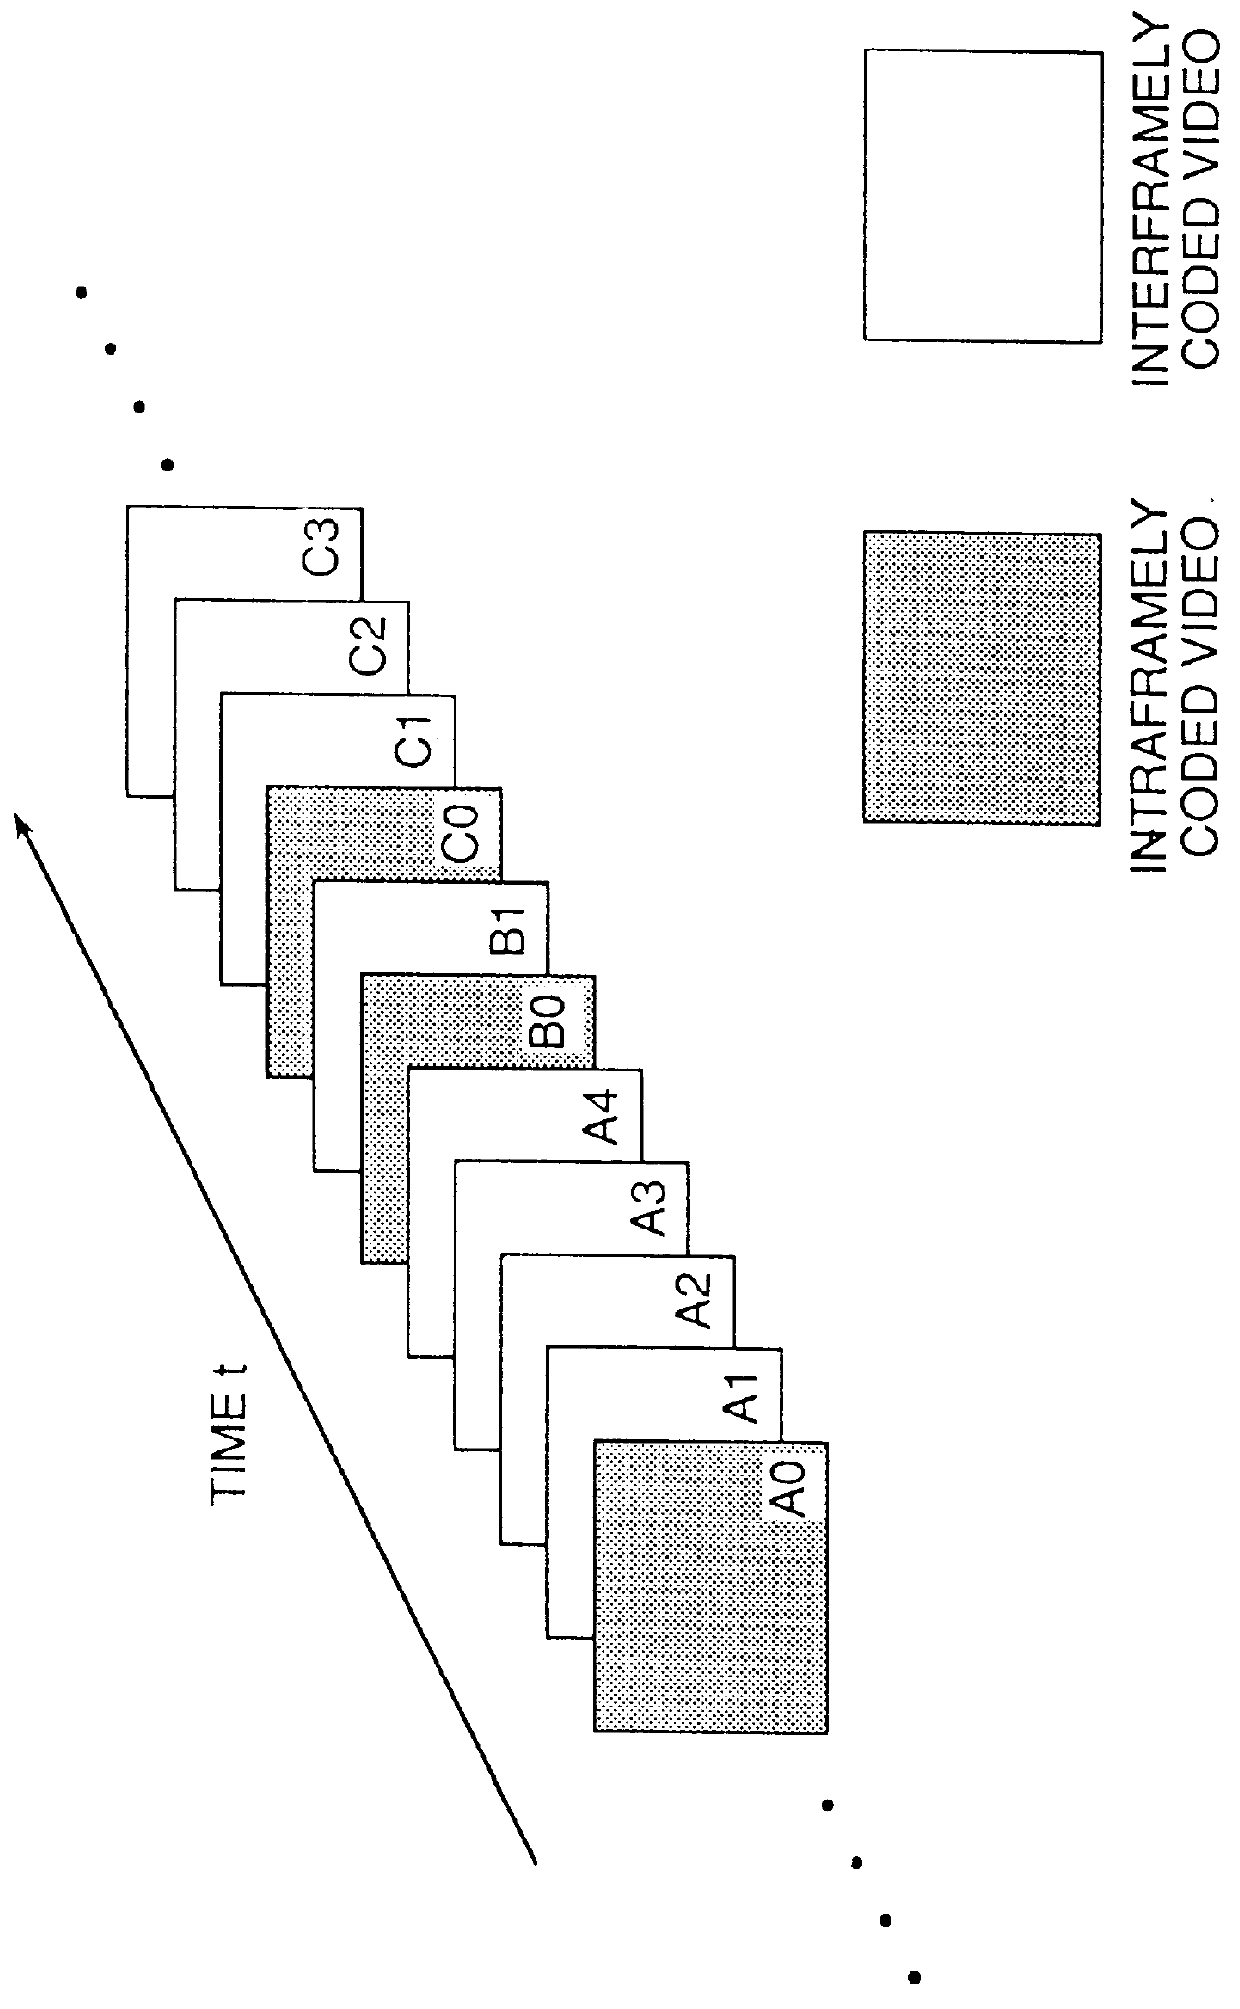 Video storage type communication device for selectively providing coded frames for selectable reproduction speed and mode according to type of a terminal device